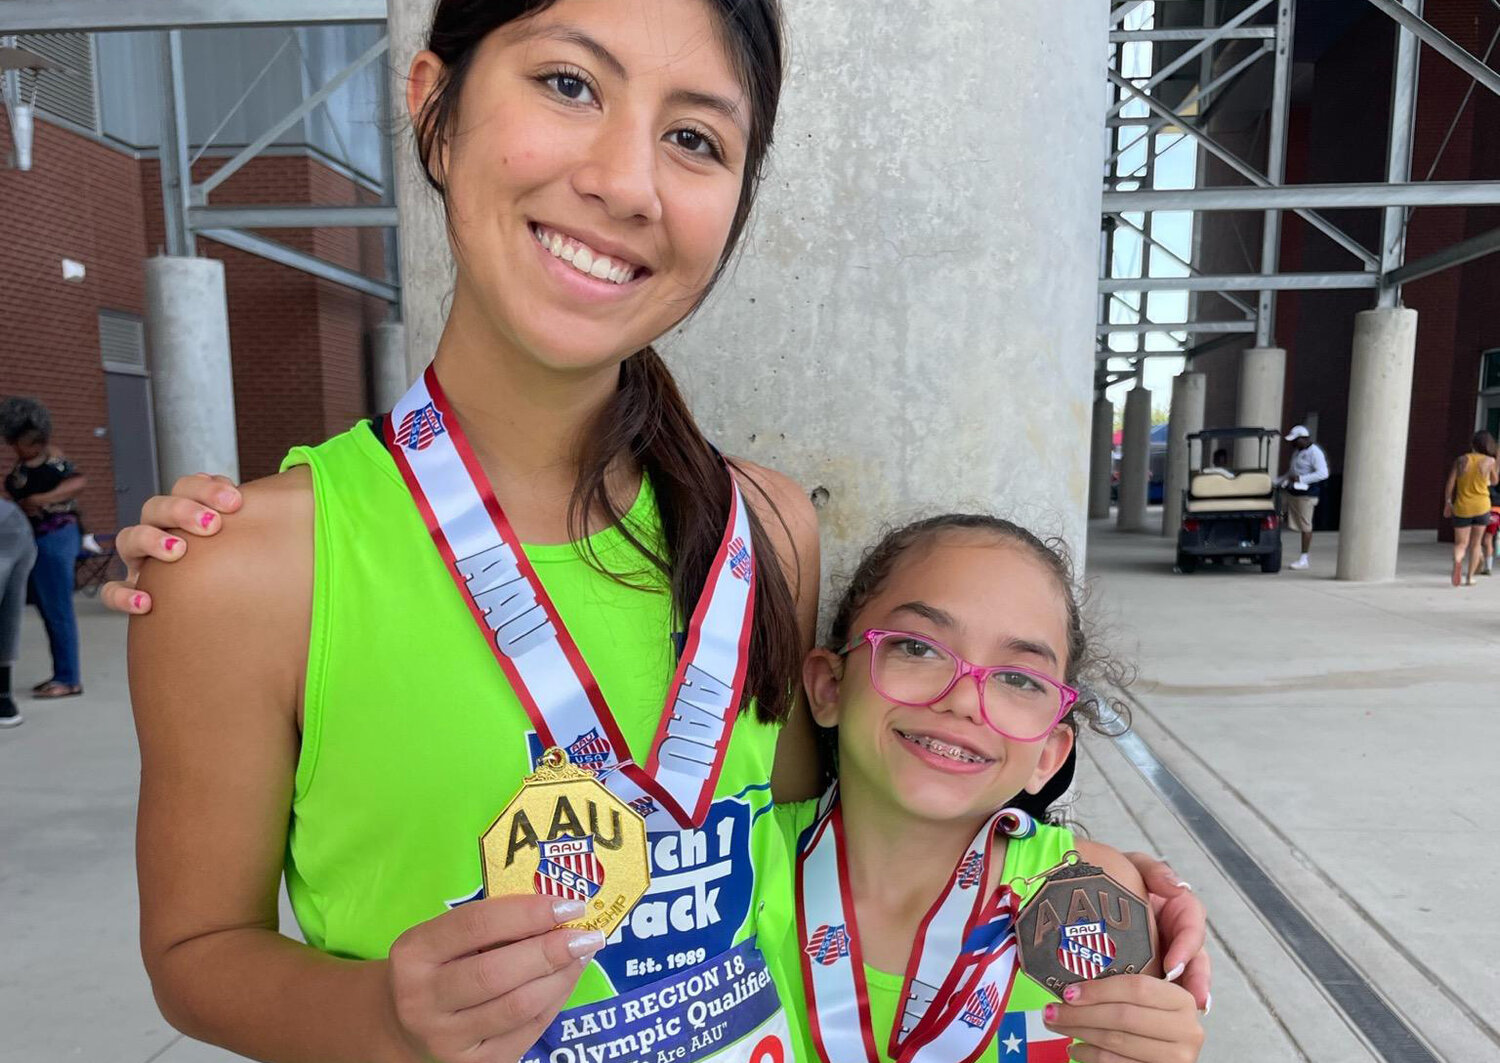 Emmy Strathmeyer (left) qualified in three events and Jenna Fink advanced in two for the upcoming Amateur Athletic Union Junior Olympics in Greensboro, North Carolina July 29-Aug. 3. In all, Mach I Track Club qualified four for the AAU meet, along with two for the USATF Junior Olympics in Bryan-College Station July 22-28.